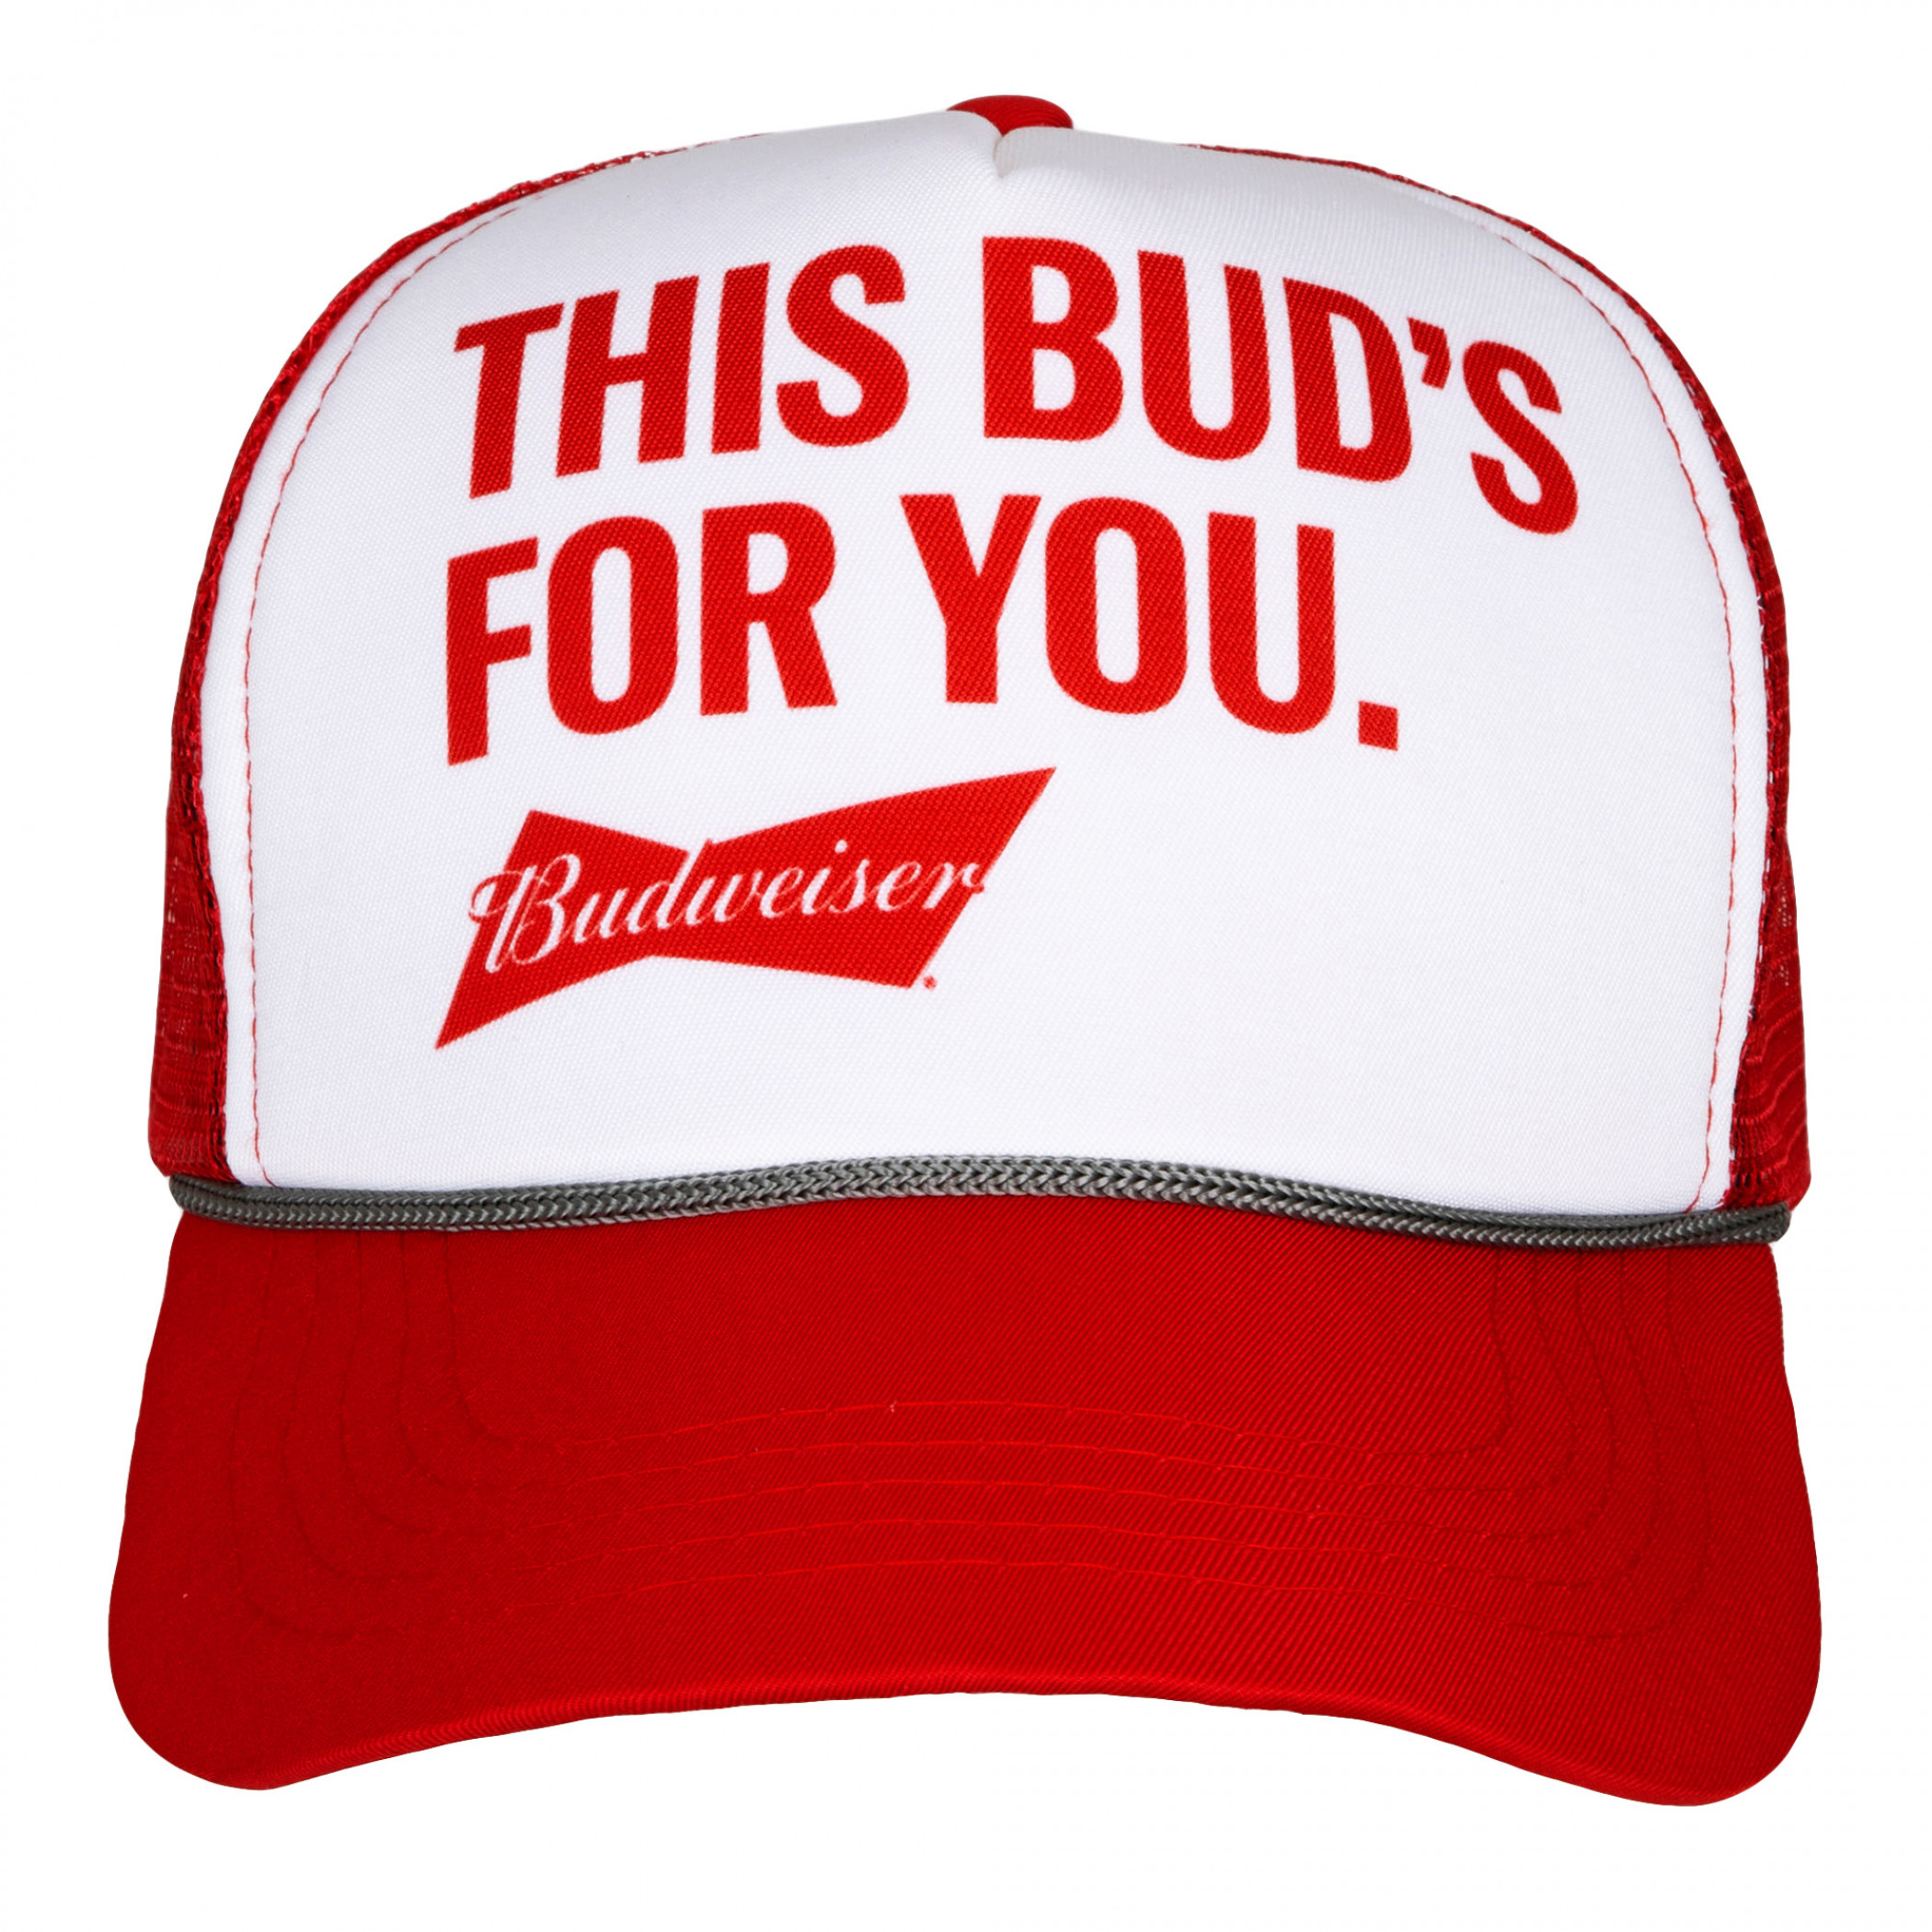 Budweiser This Bud's For You Trucker Hat